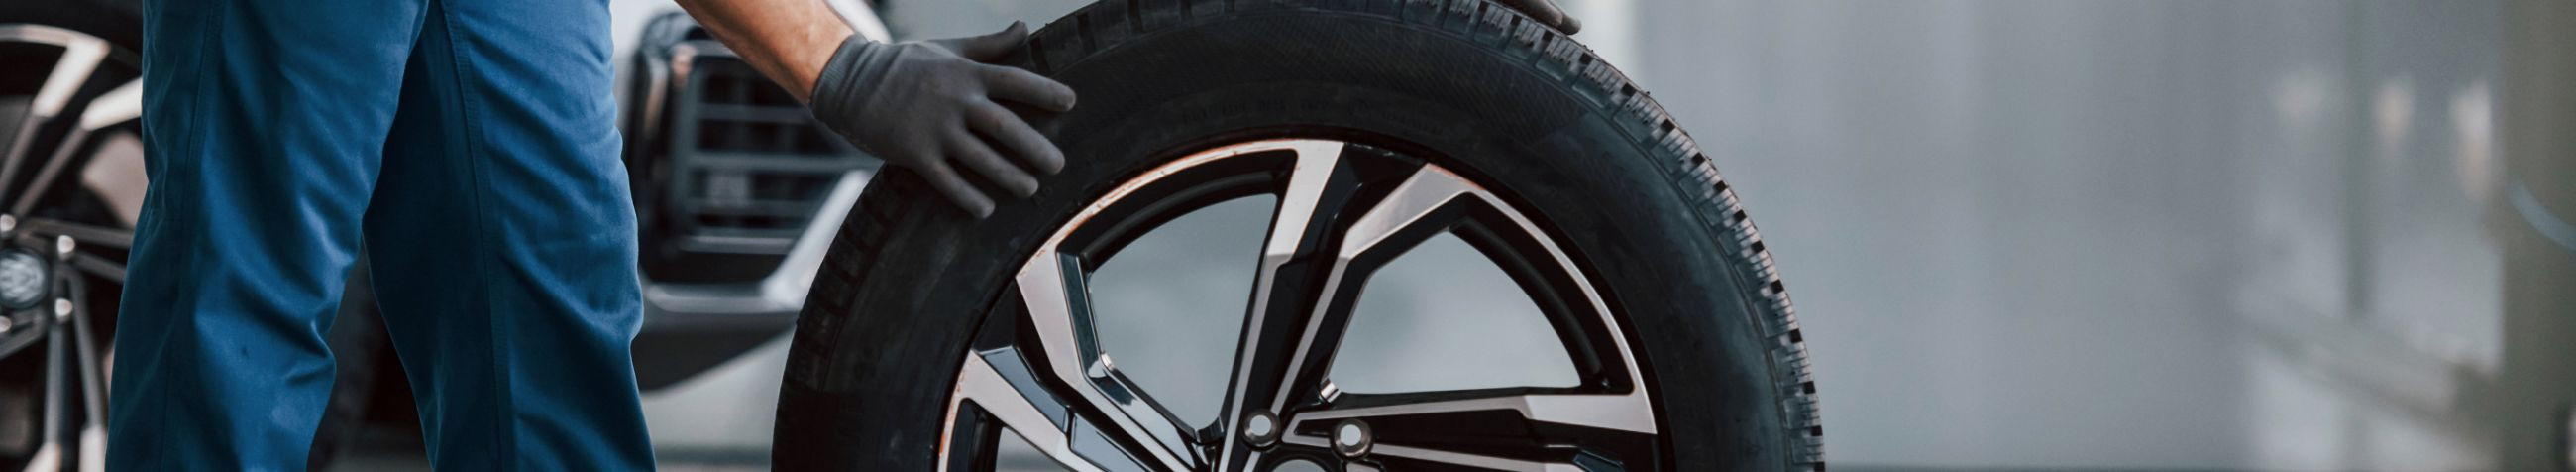 We offer a full range of services for cars, vans, and SUVs, including parts replacement, electrical work, light configuration, bridge adjustment, wheel balancing, tyre repair, and tyre storage.